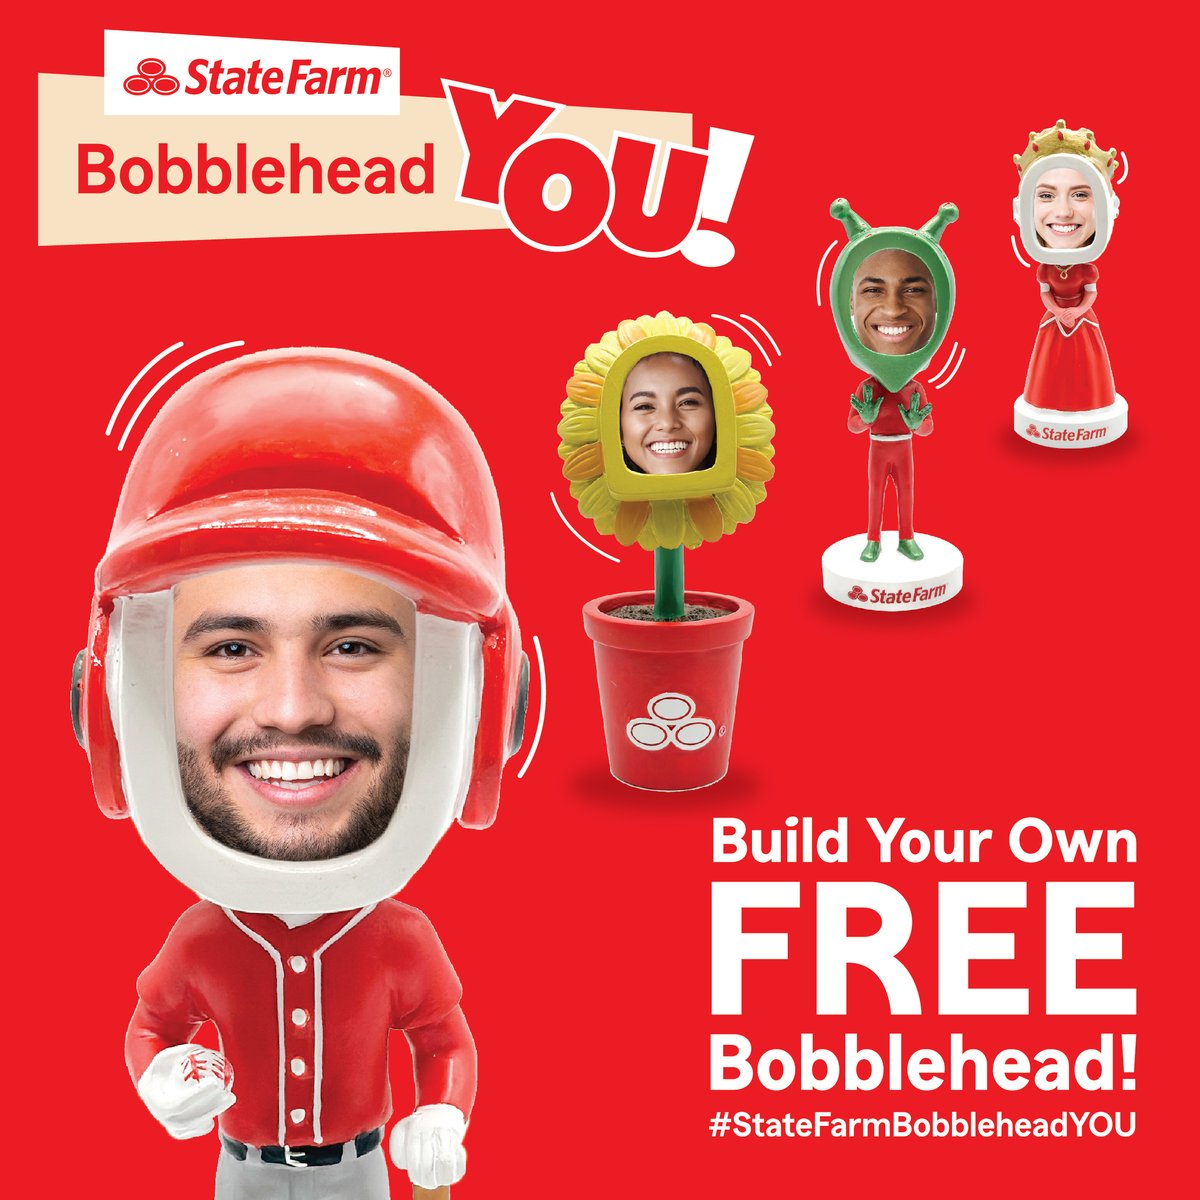 Fulfill your dreams at #BBQinDC with a FREE #StateFarmBobbleheadYou!, a personalized bobblehead, courtesy of @StateFarm! Transform into an alien, princess, or even an astronaut! In only 5 minutes, they'll take your photo and place it in one of 14 Bobblehead options of your pick!